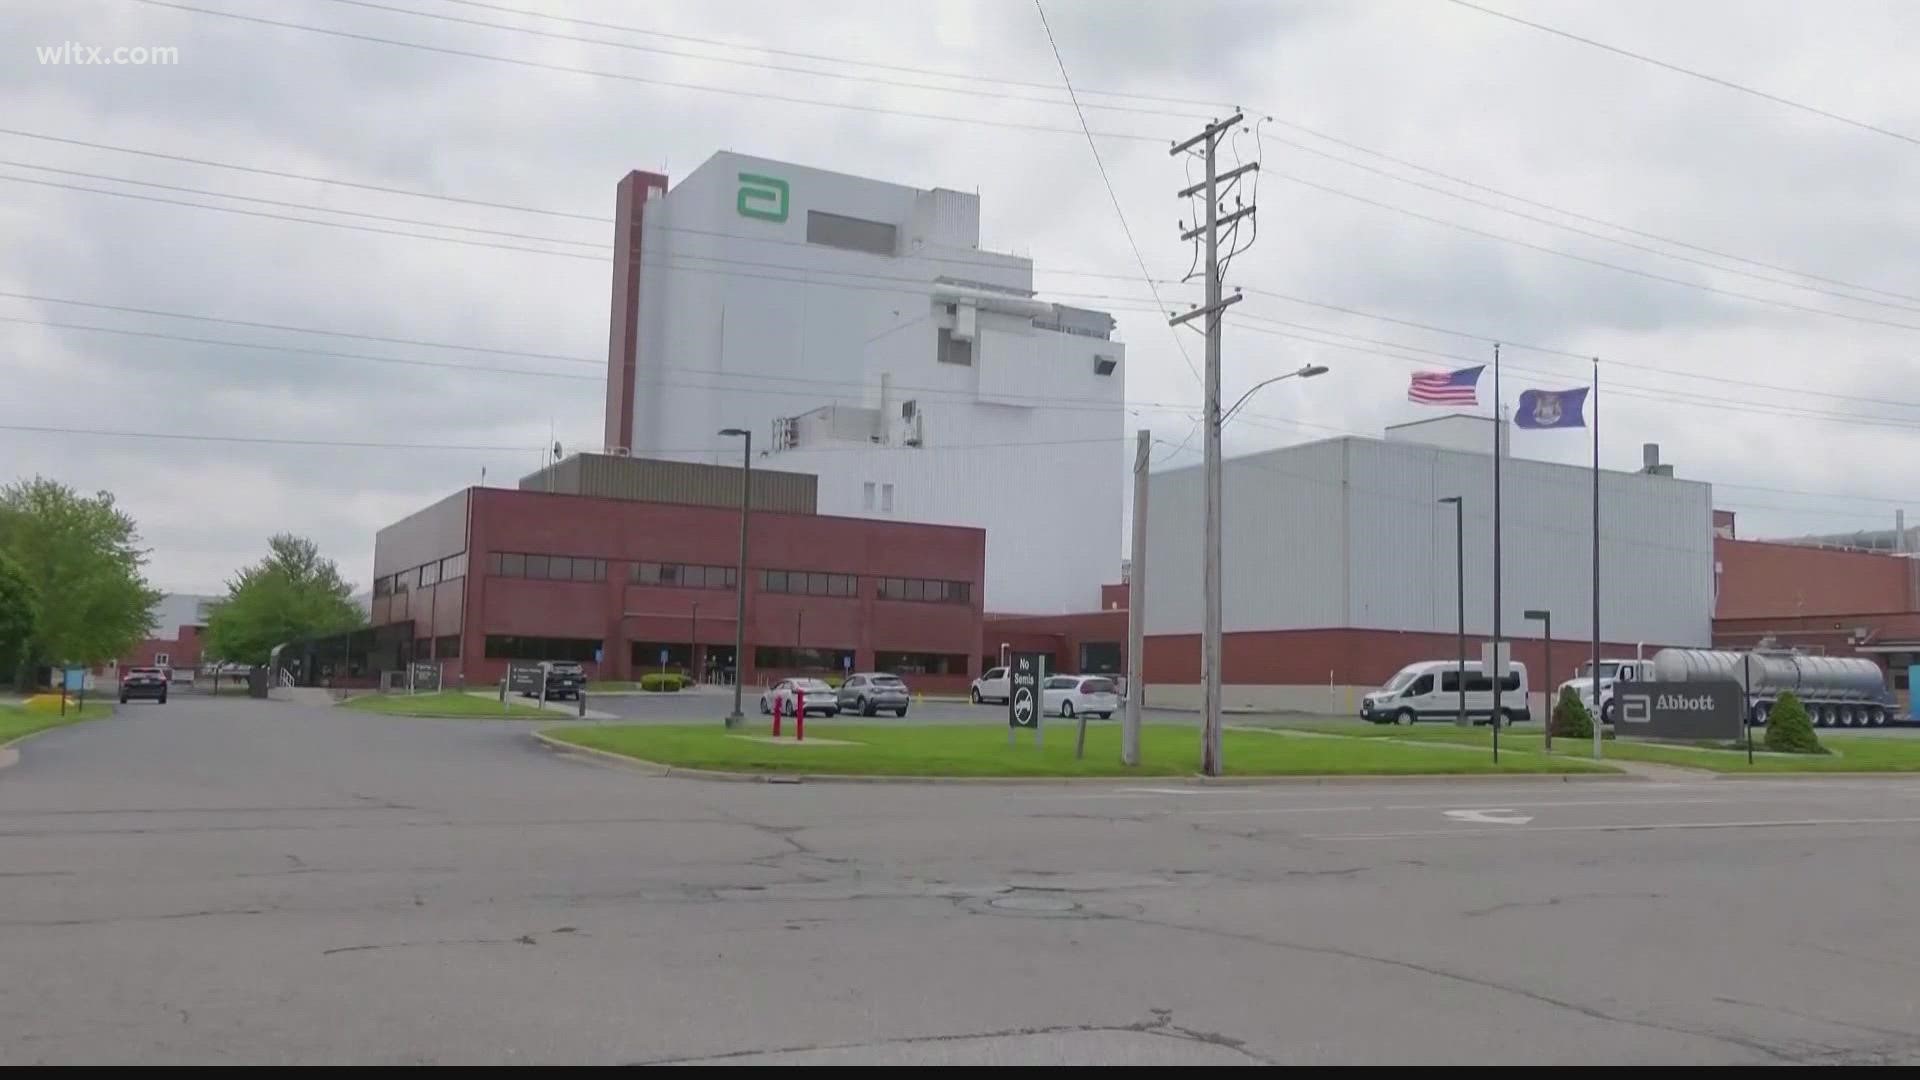 Abbott Nutrition has restarted production at the Michigan baby formula factory that has been closed for months due to contamination.